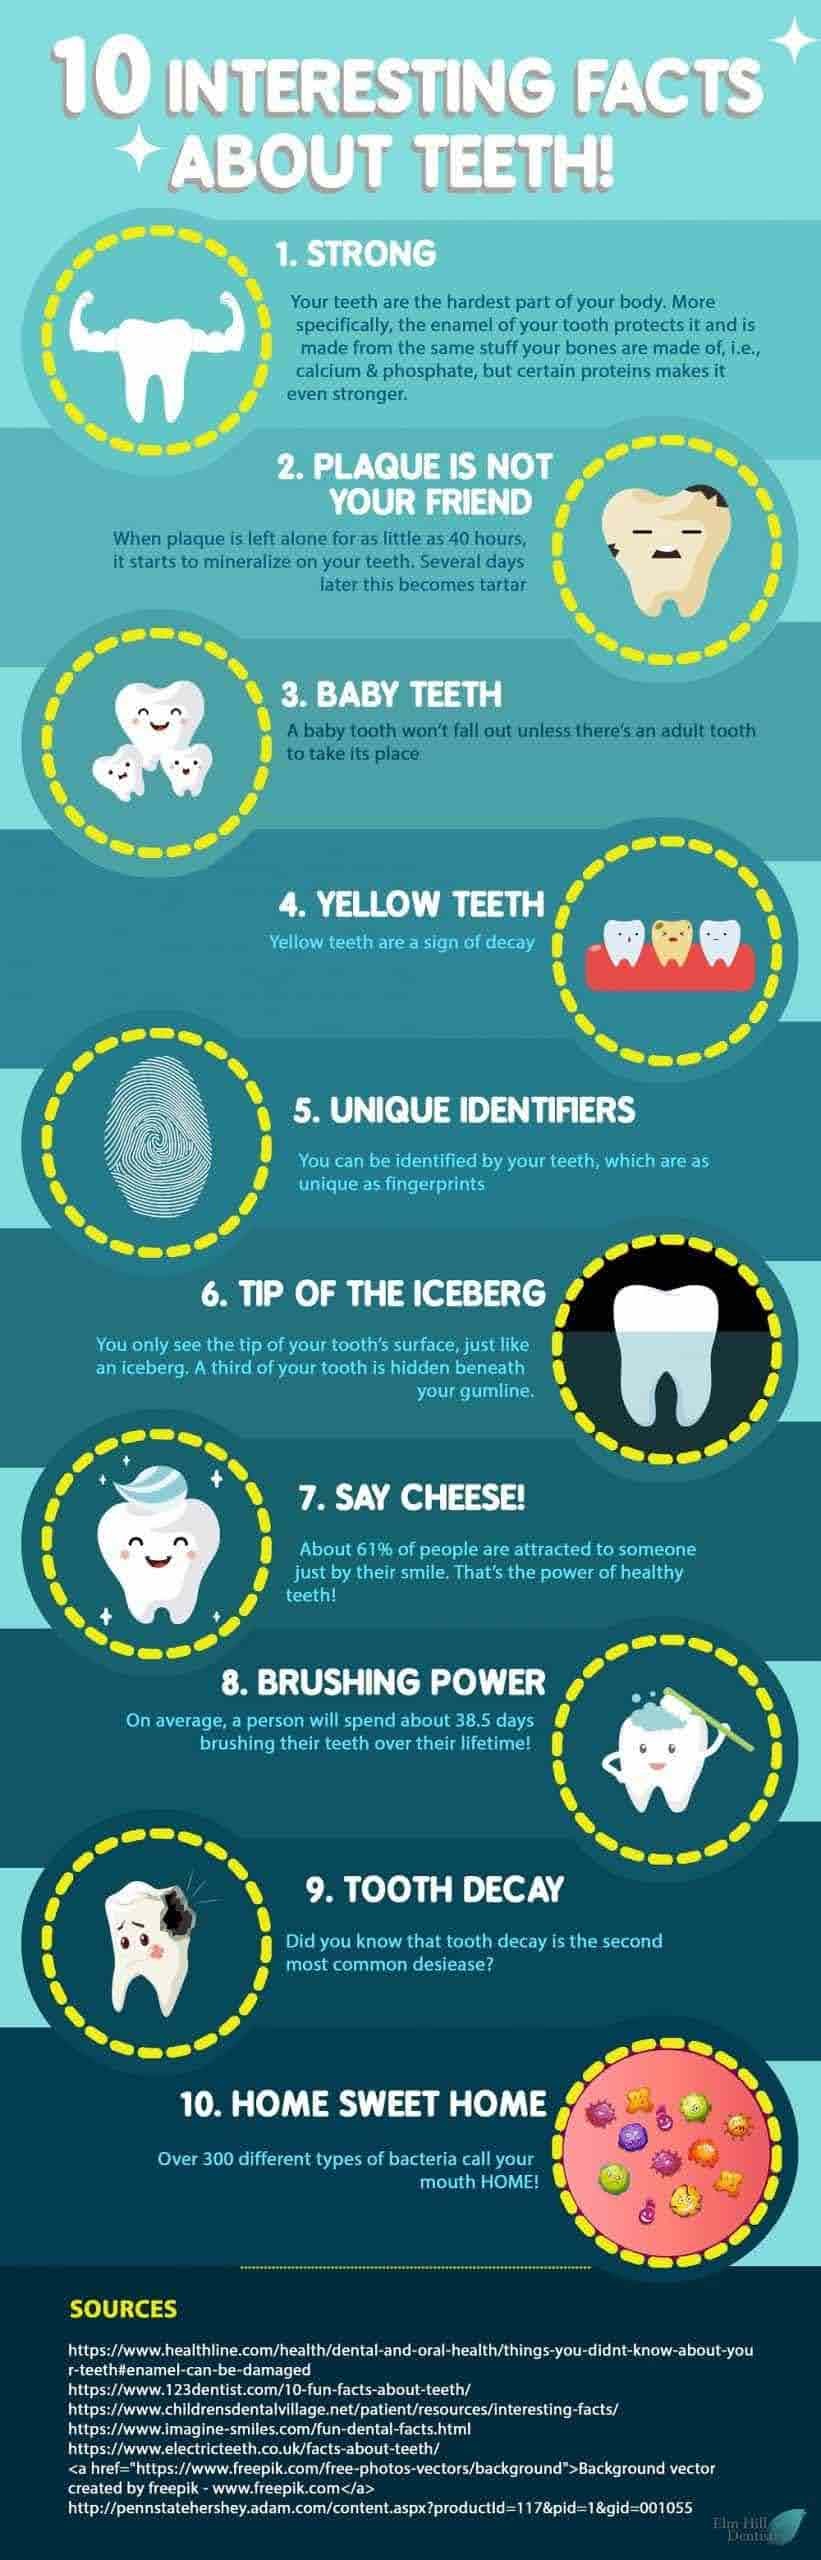 10 Interesting Facts About Teeth #infographic